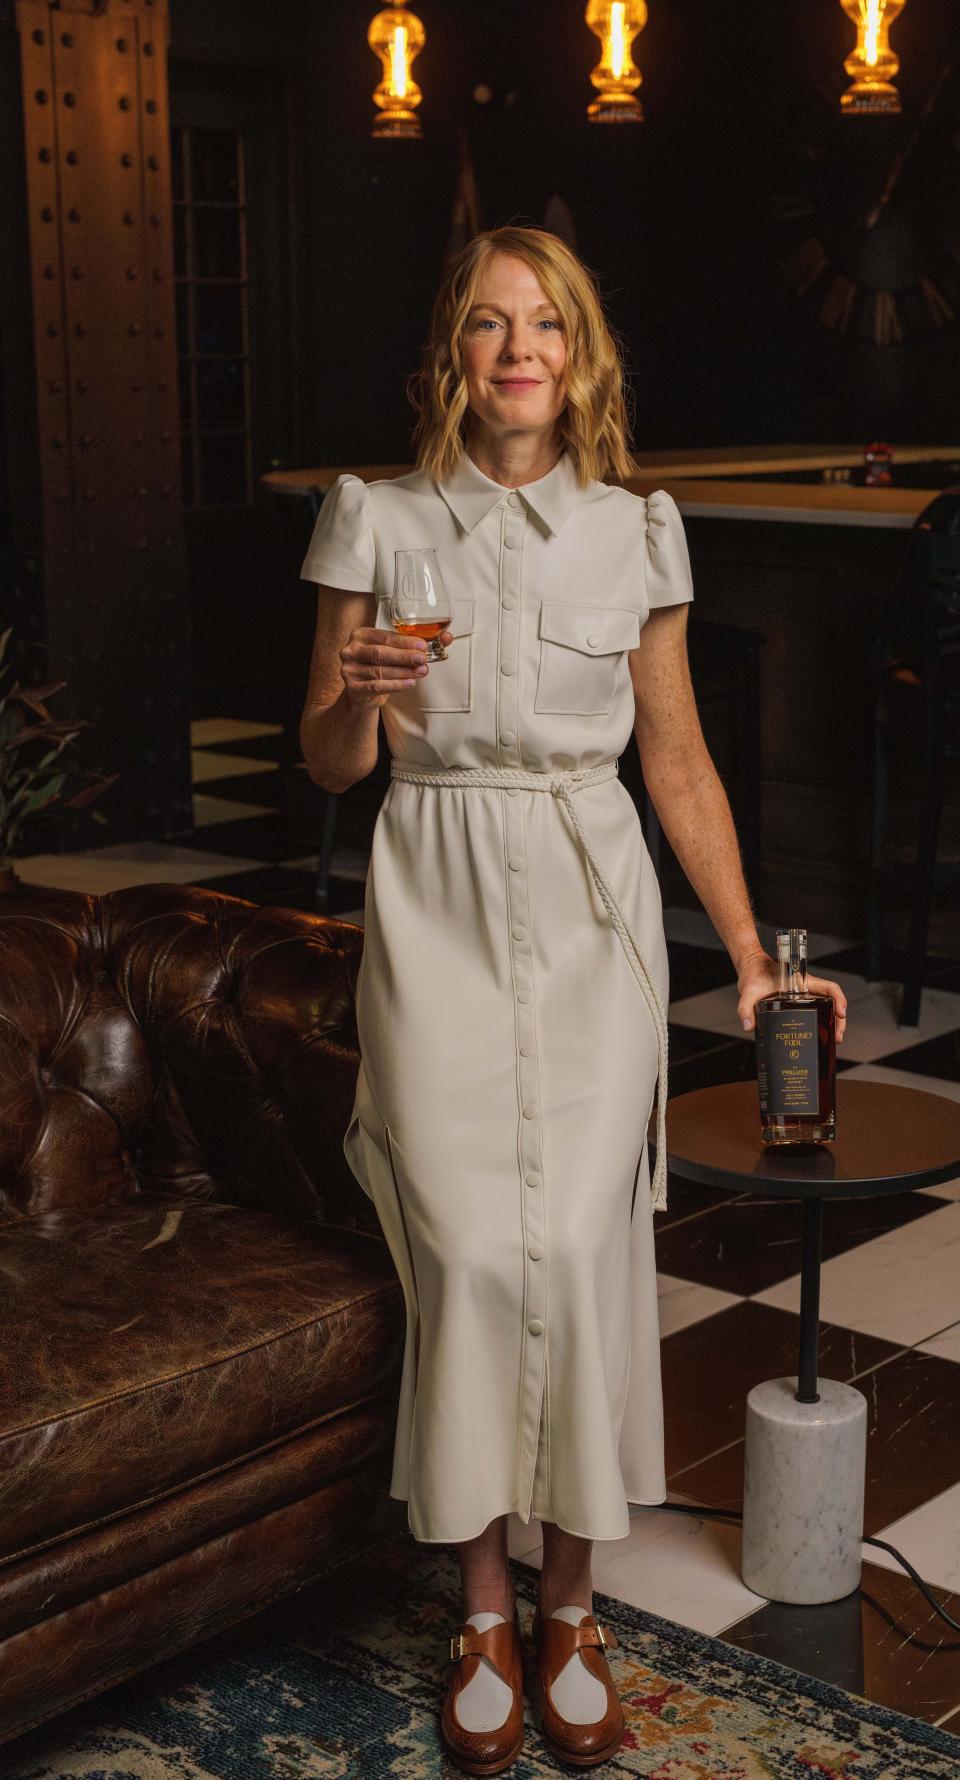 Fortune's Fool CEO Juliet Schmalz stands with a bottle of her debut whiskey, the Prelude